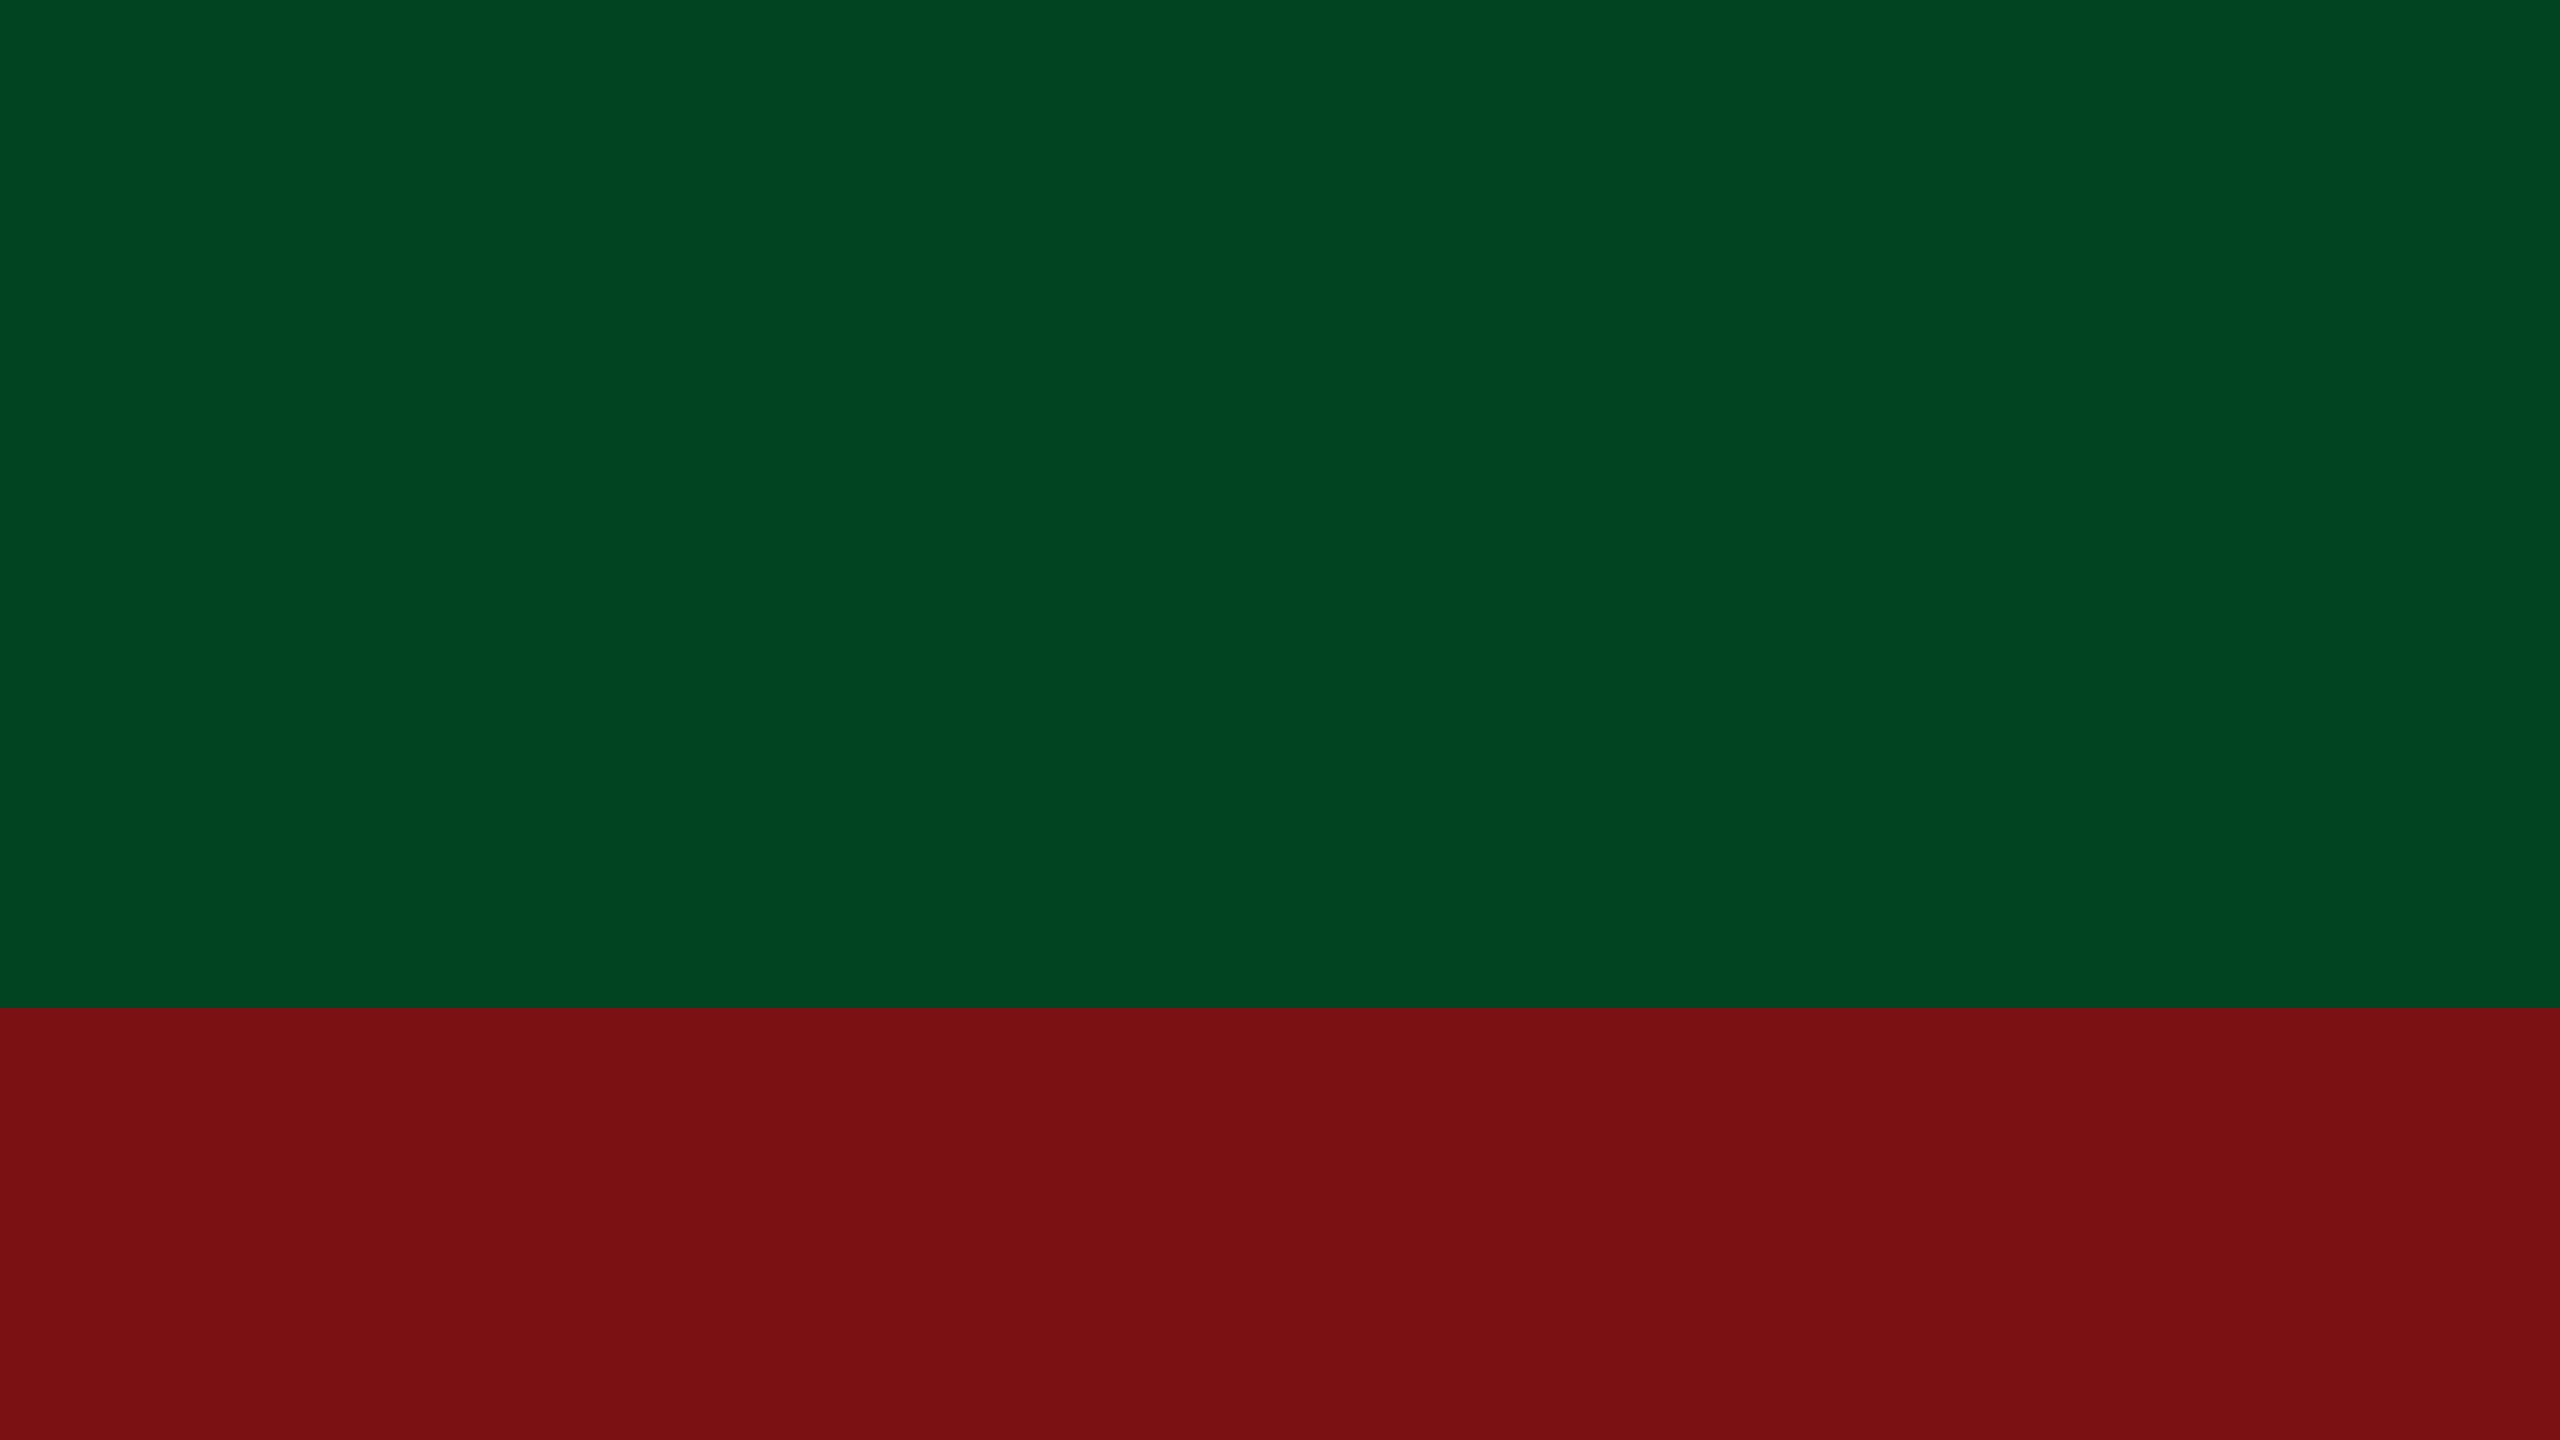 UP Forest Green and UP Maroon Two Color Background